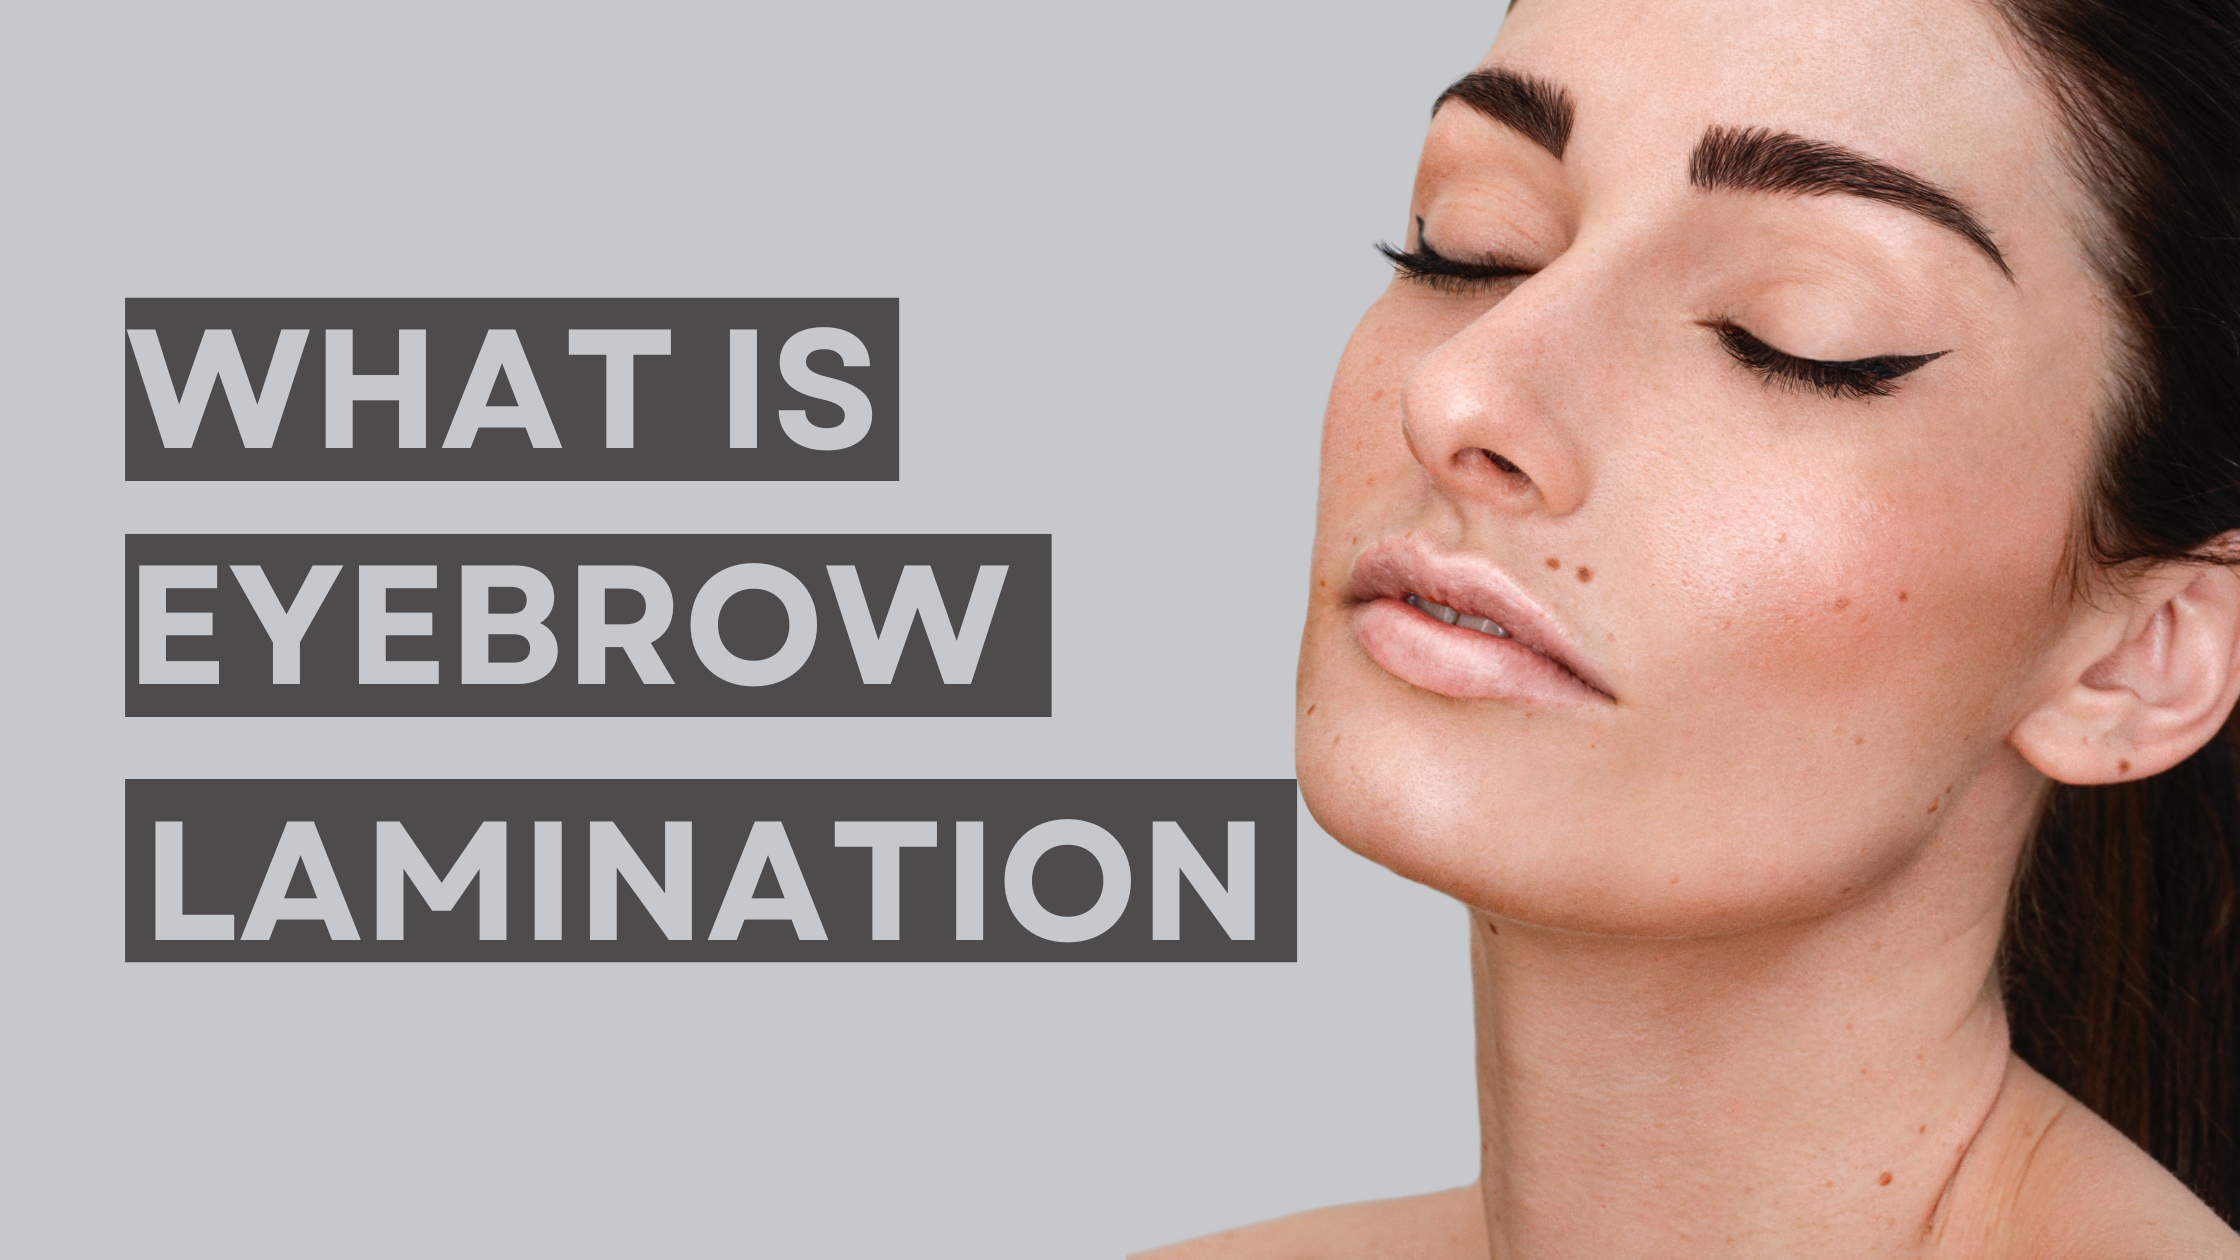 What is eyebrow lamination